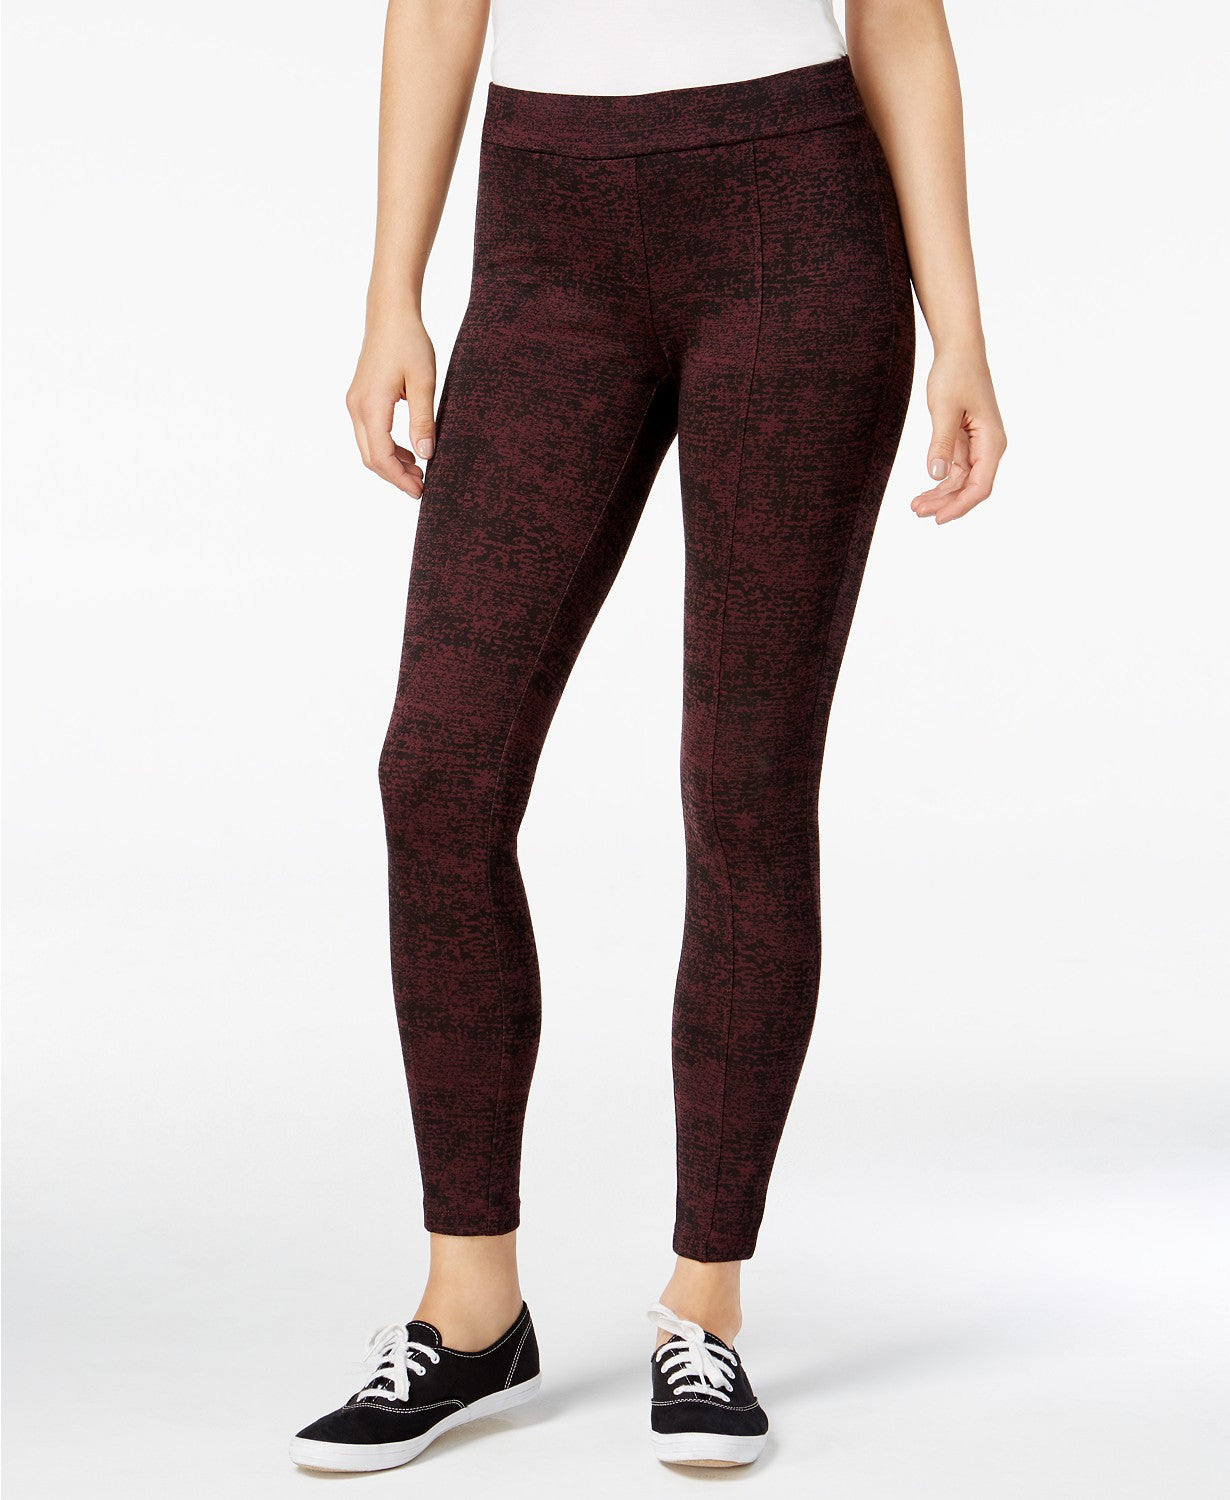 Style Co Petite Printed Ponte Leggings Mixed Marled PXS